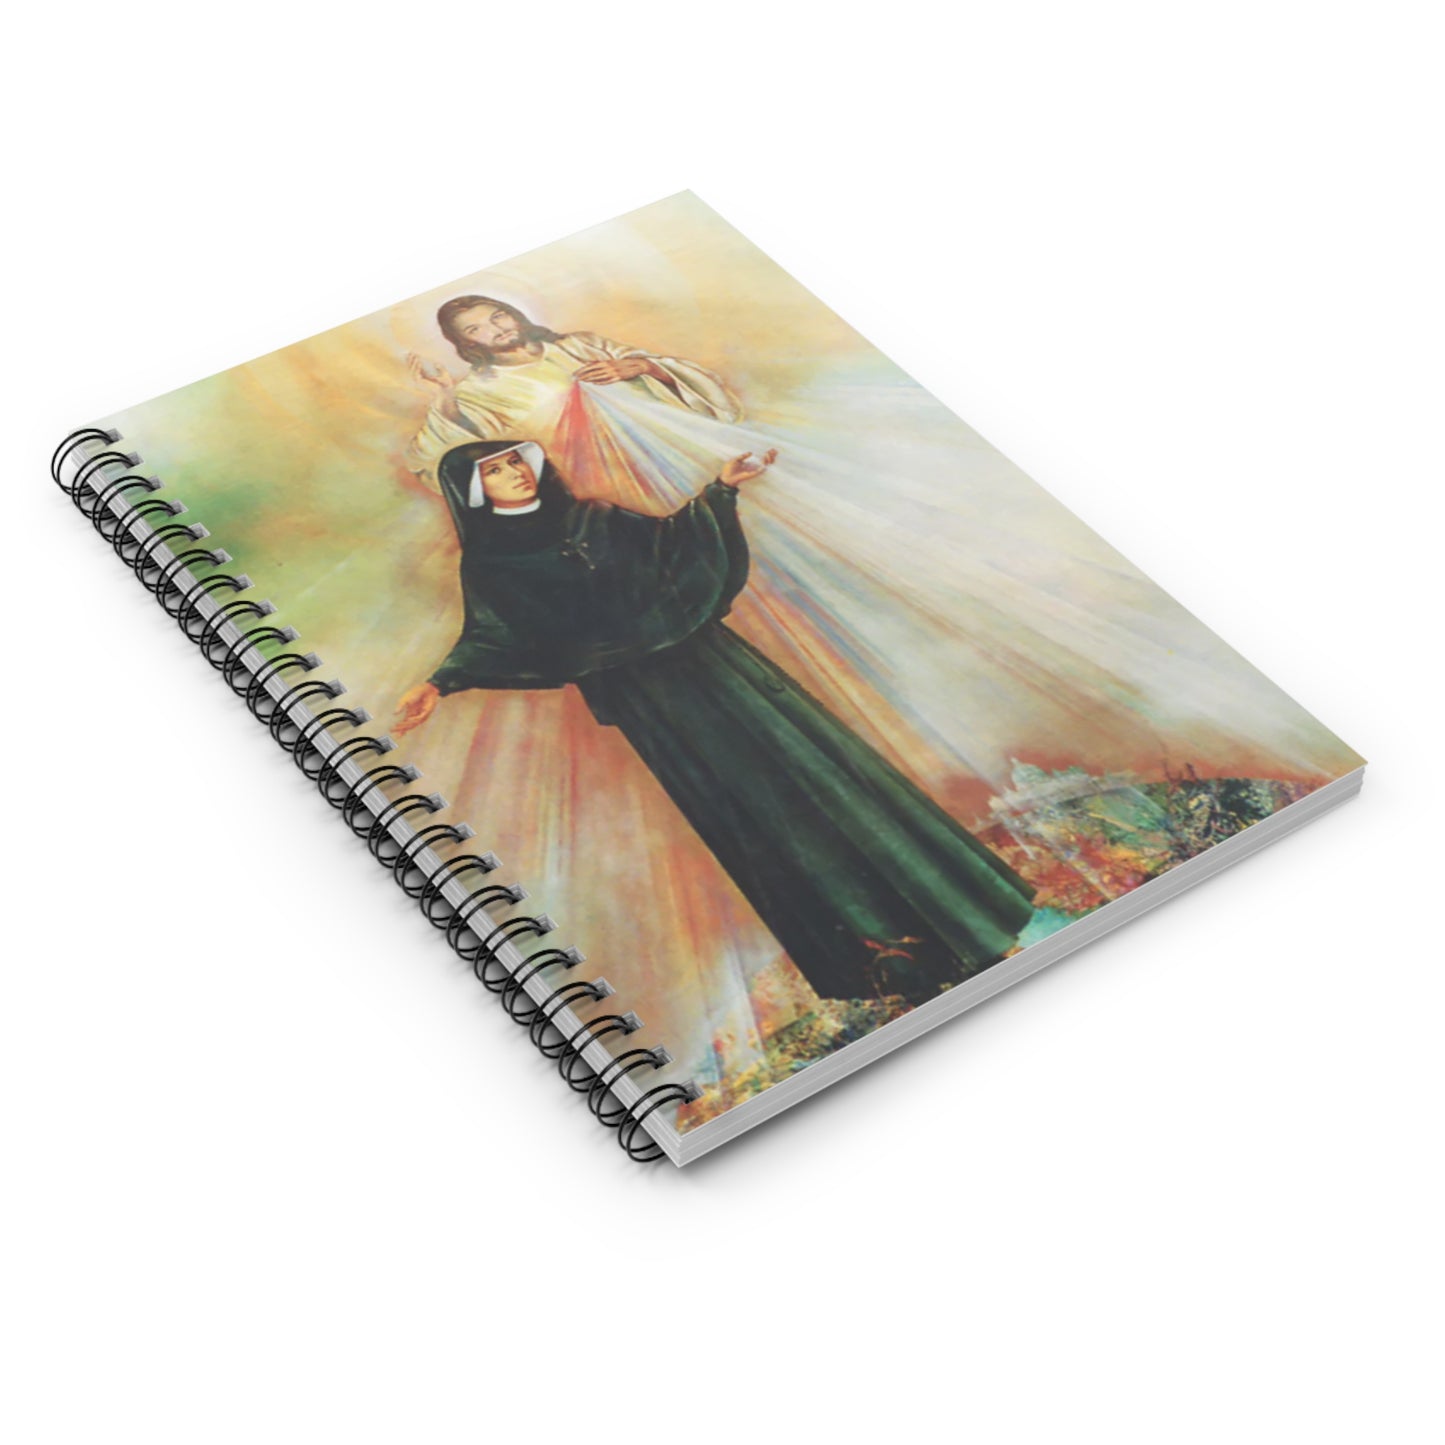 Saint Faustina Catholic Notebook the Little Flower, Christian Diary Gift, Christmas Religious Journal, Confirmation Gift for St Faustina